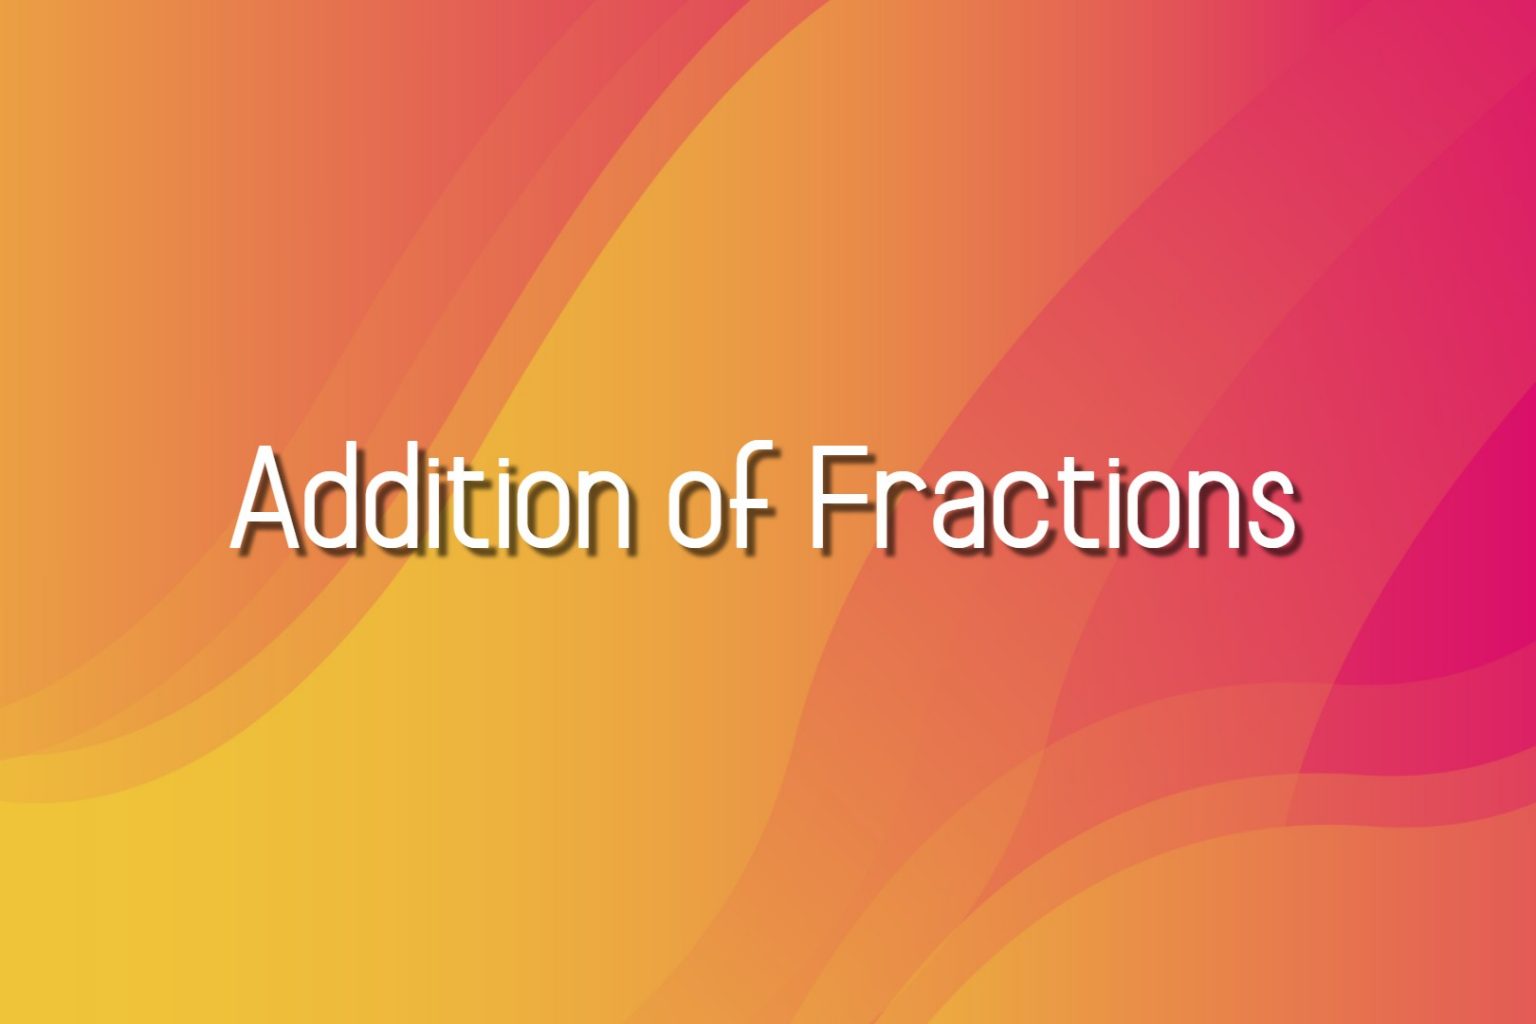 addition-of-fractions-learn-with-easy-steps-math-tutor